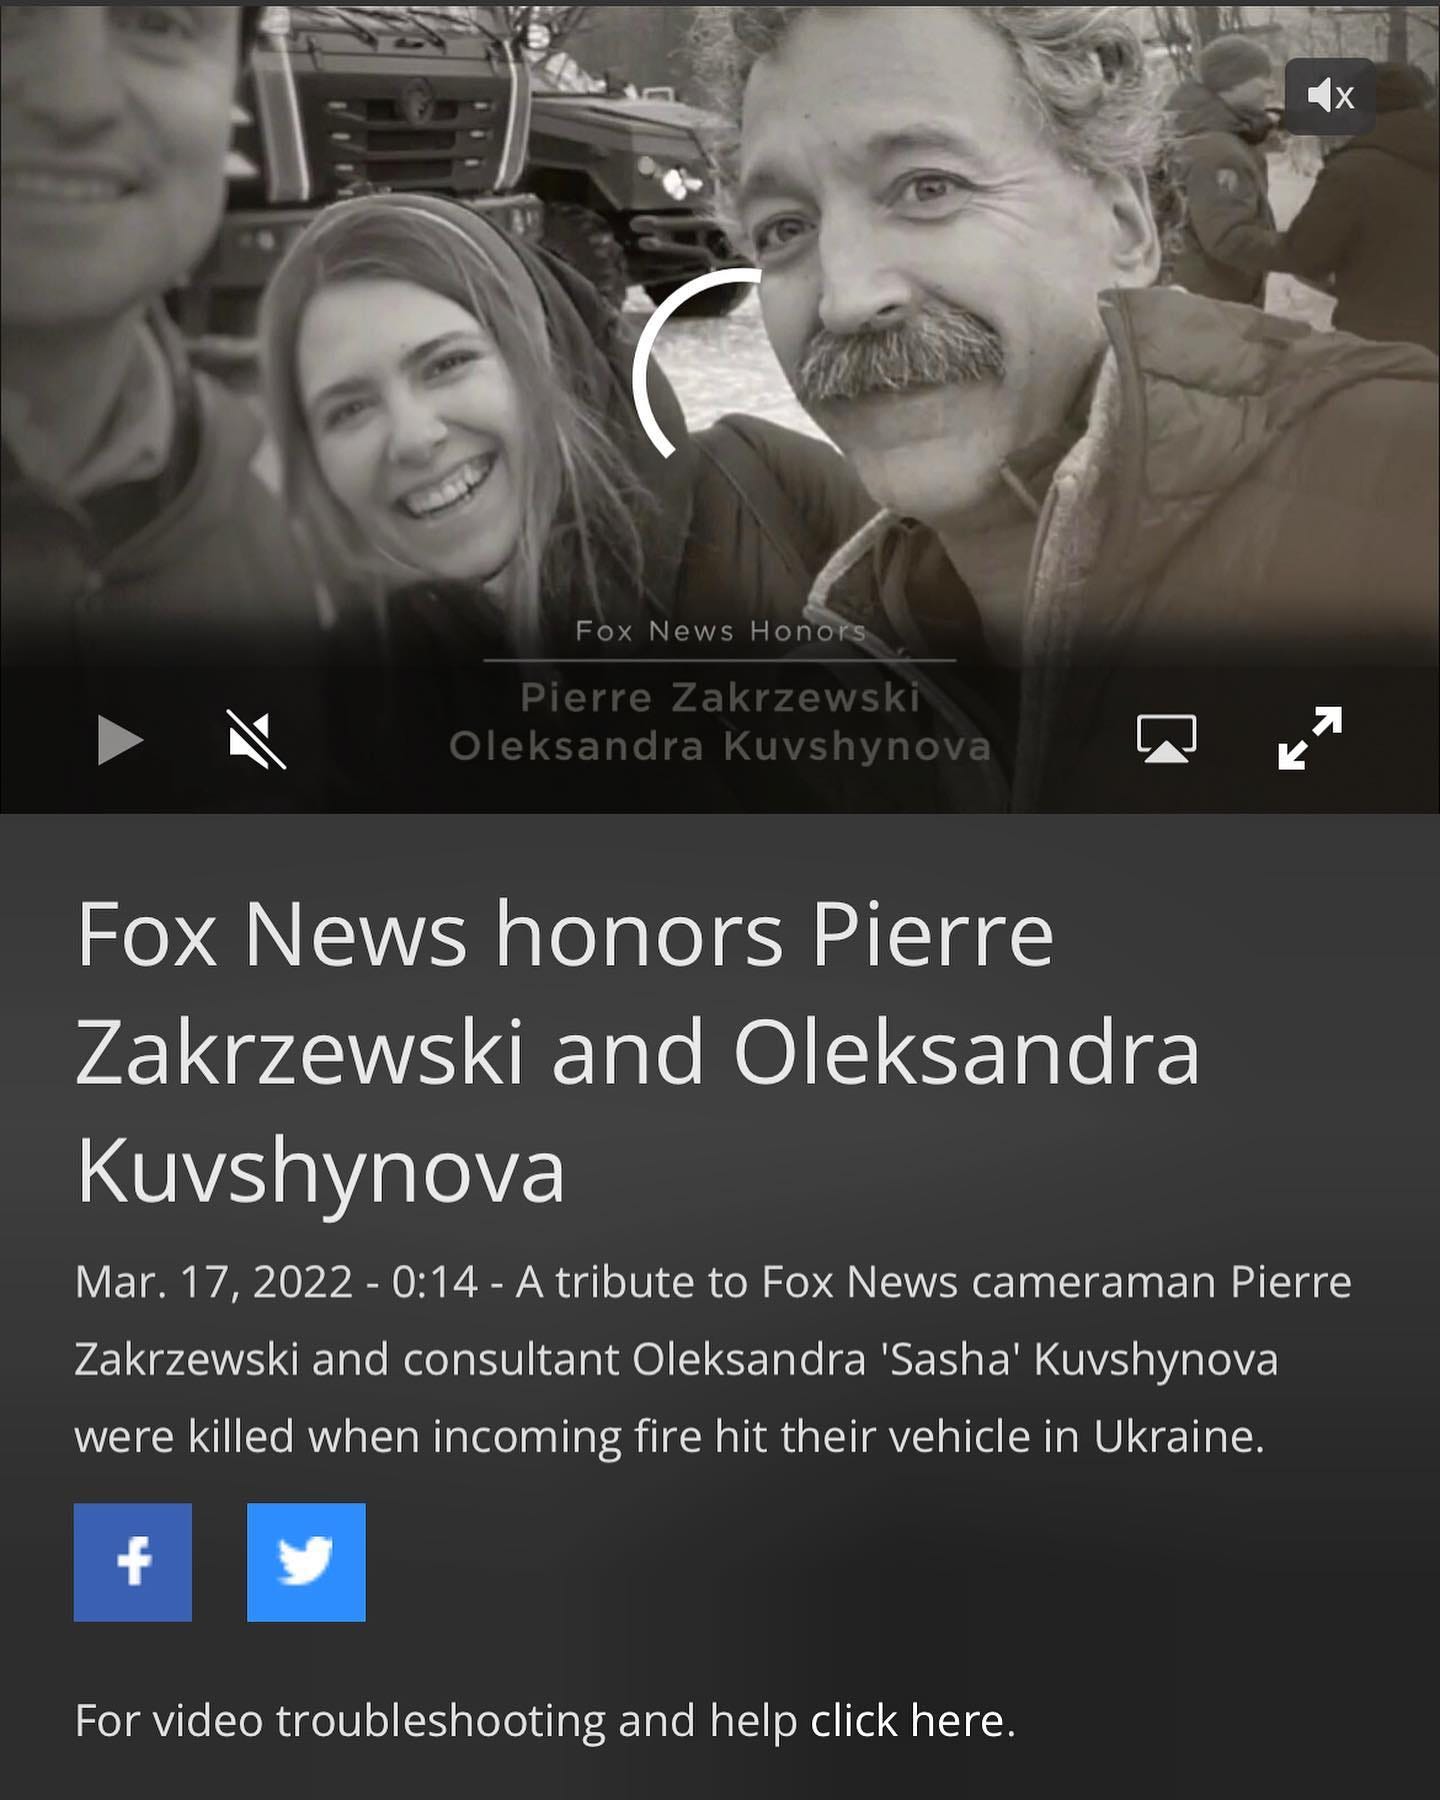 May be an image of 3 people and text that says 'Fox News honors Pierre Zakrzewski and Oleksandra Kuvshynova Mar. 17, 2022 0:14 A tribute to Fox News cameraman Pierre Zakrzewski and consultant Oleksandra 'Sasha' Kuvshynova were killed when incoming fire hit their vehicle in Ukraine. f For video troubleshooting and help click here.'